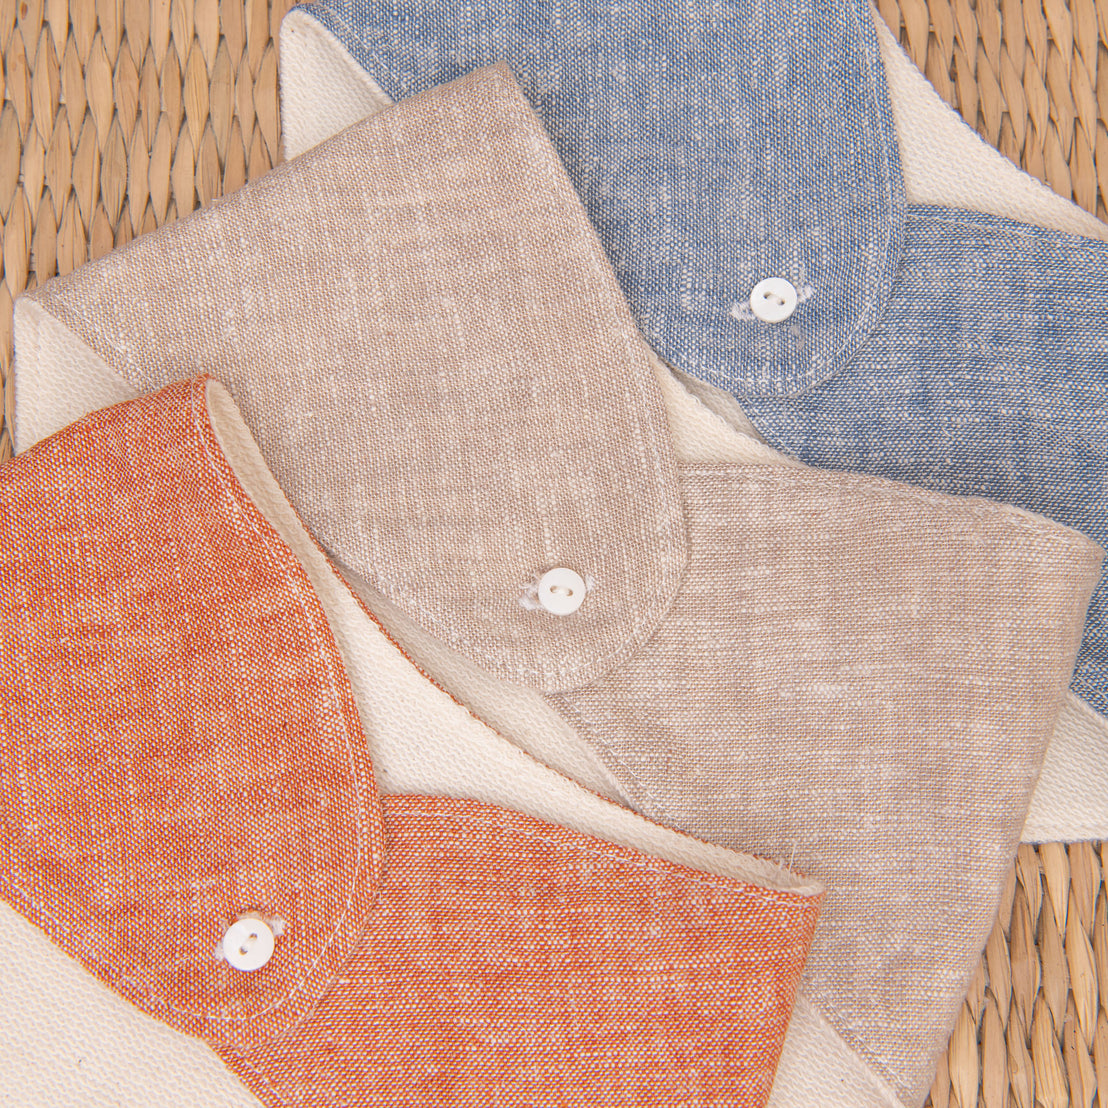 Flat lay photo of the back of all three colors of the Silas Bandana Bib. The bibs are made from linen in three different colors: indigo, sand, and clay. The back features the button closure